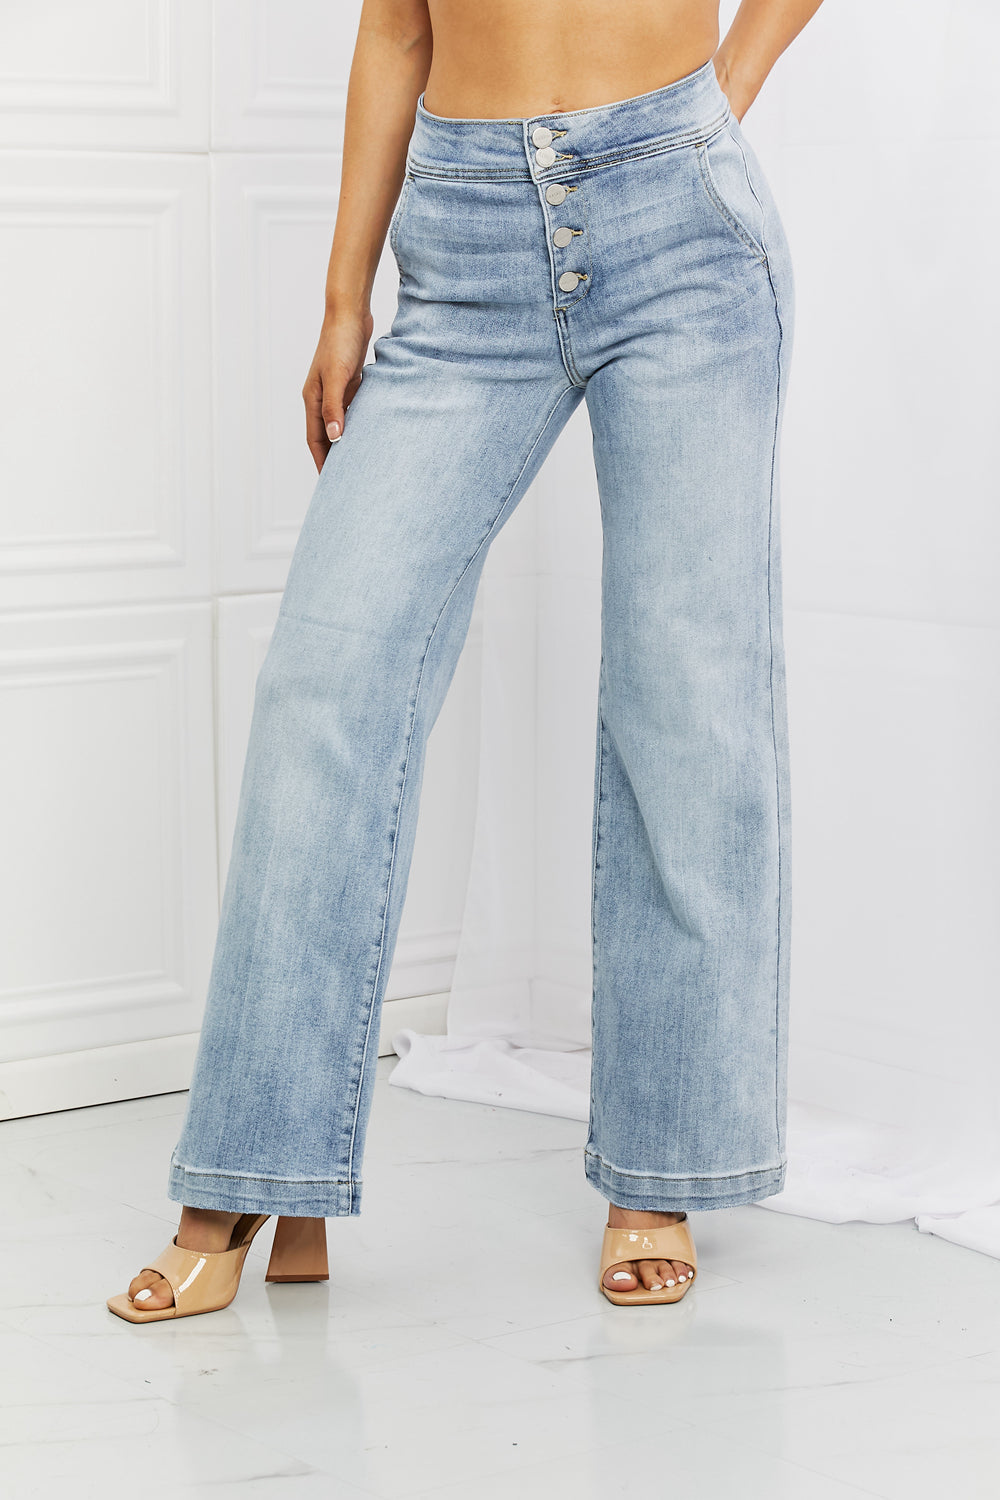 LIGHT - RISEN Full Size Luisa Wide Flare Jeans - Ships from The US - womens jeans at TFC&H Co.